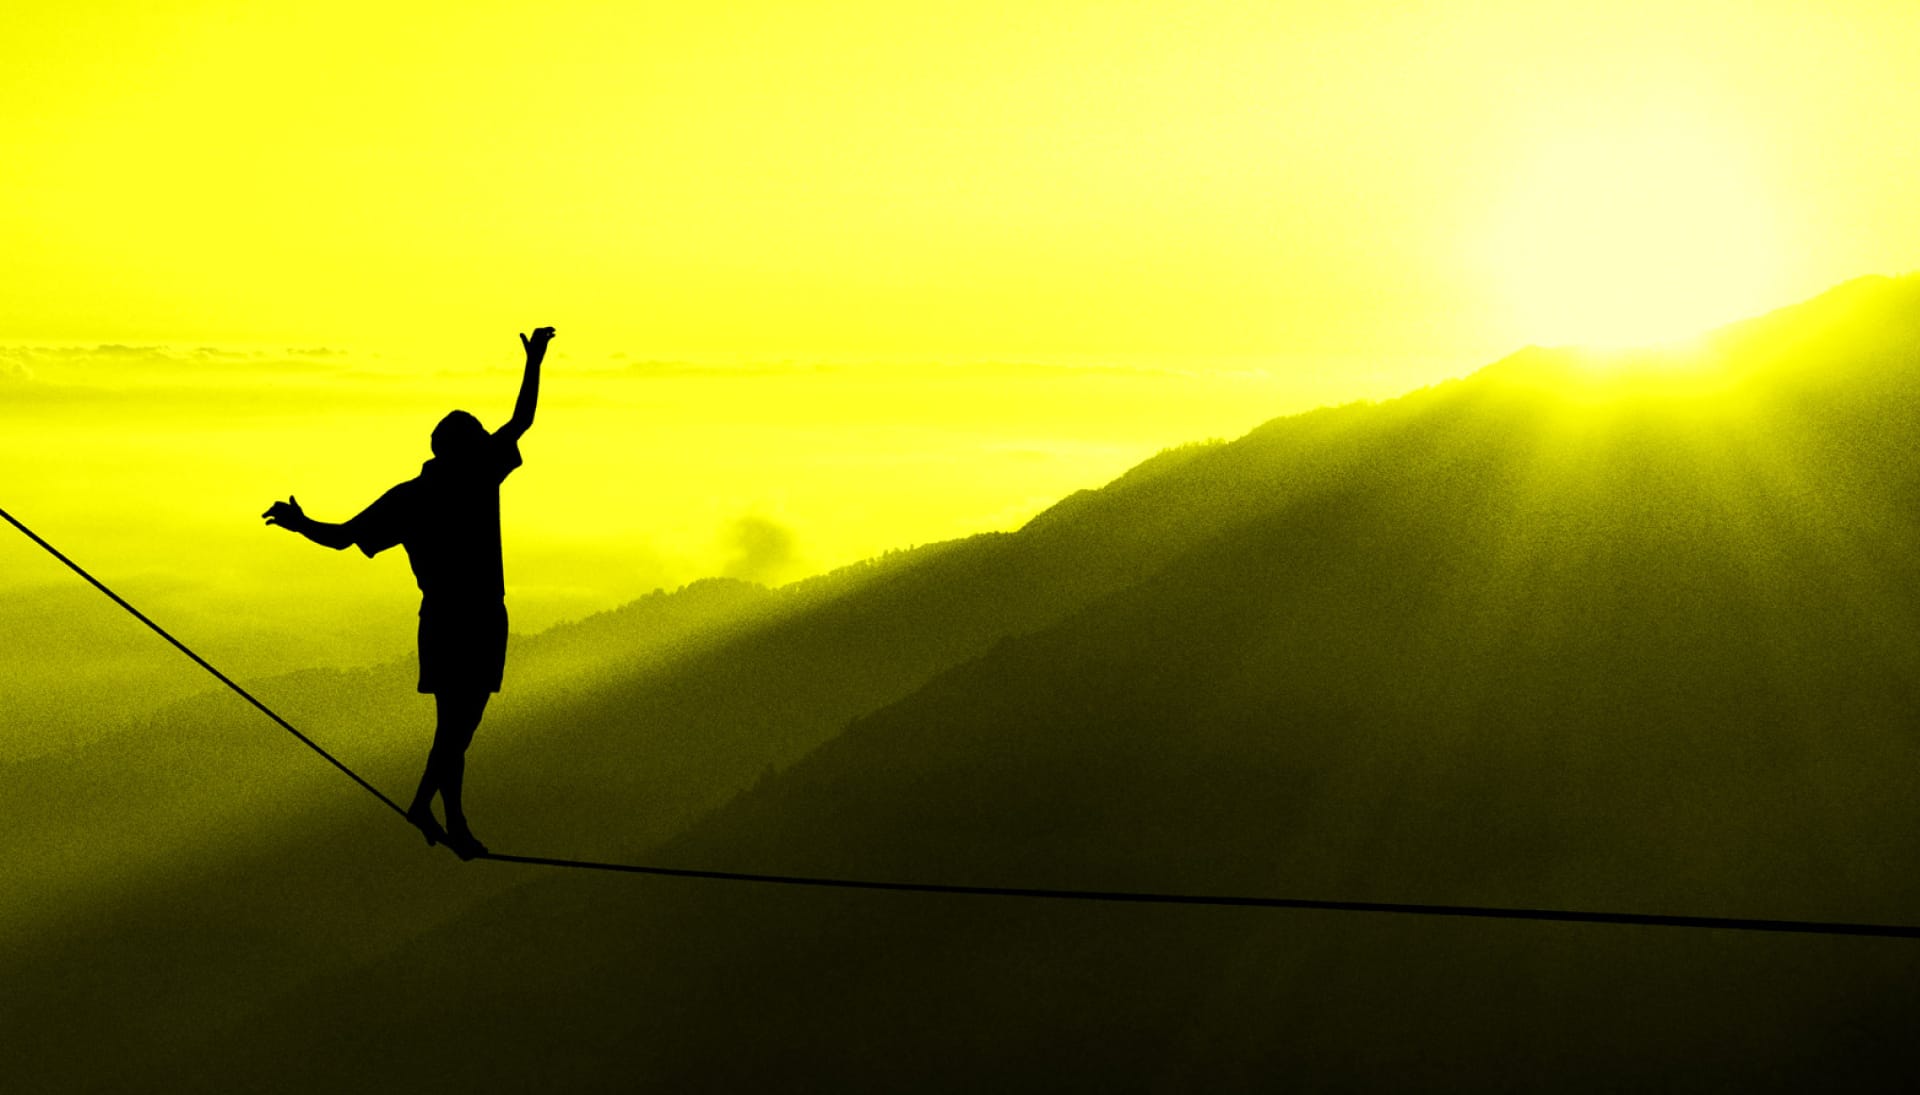 A person walking a tightrope as the sun sets